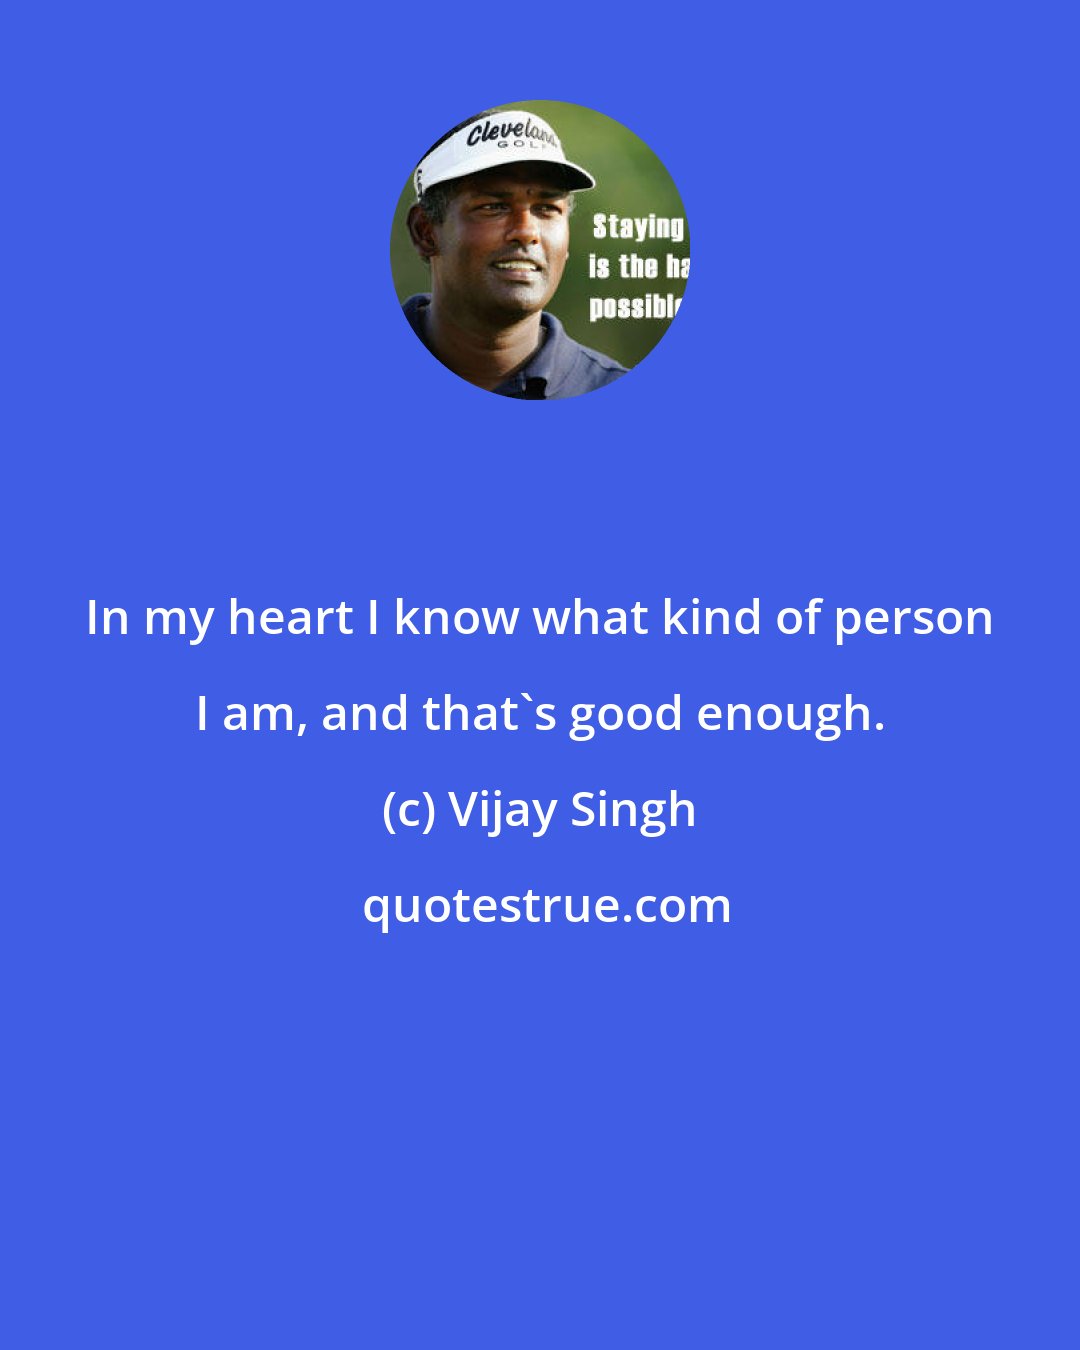 Vijay Singh: In my heart I know what kind of person I am, and that's good enough.